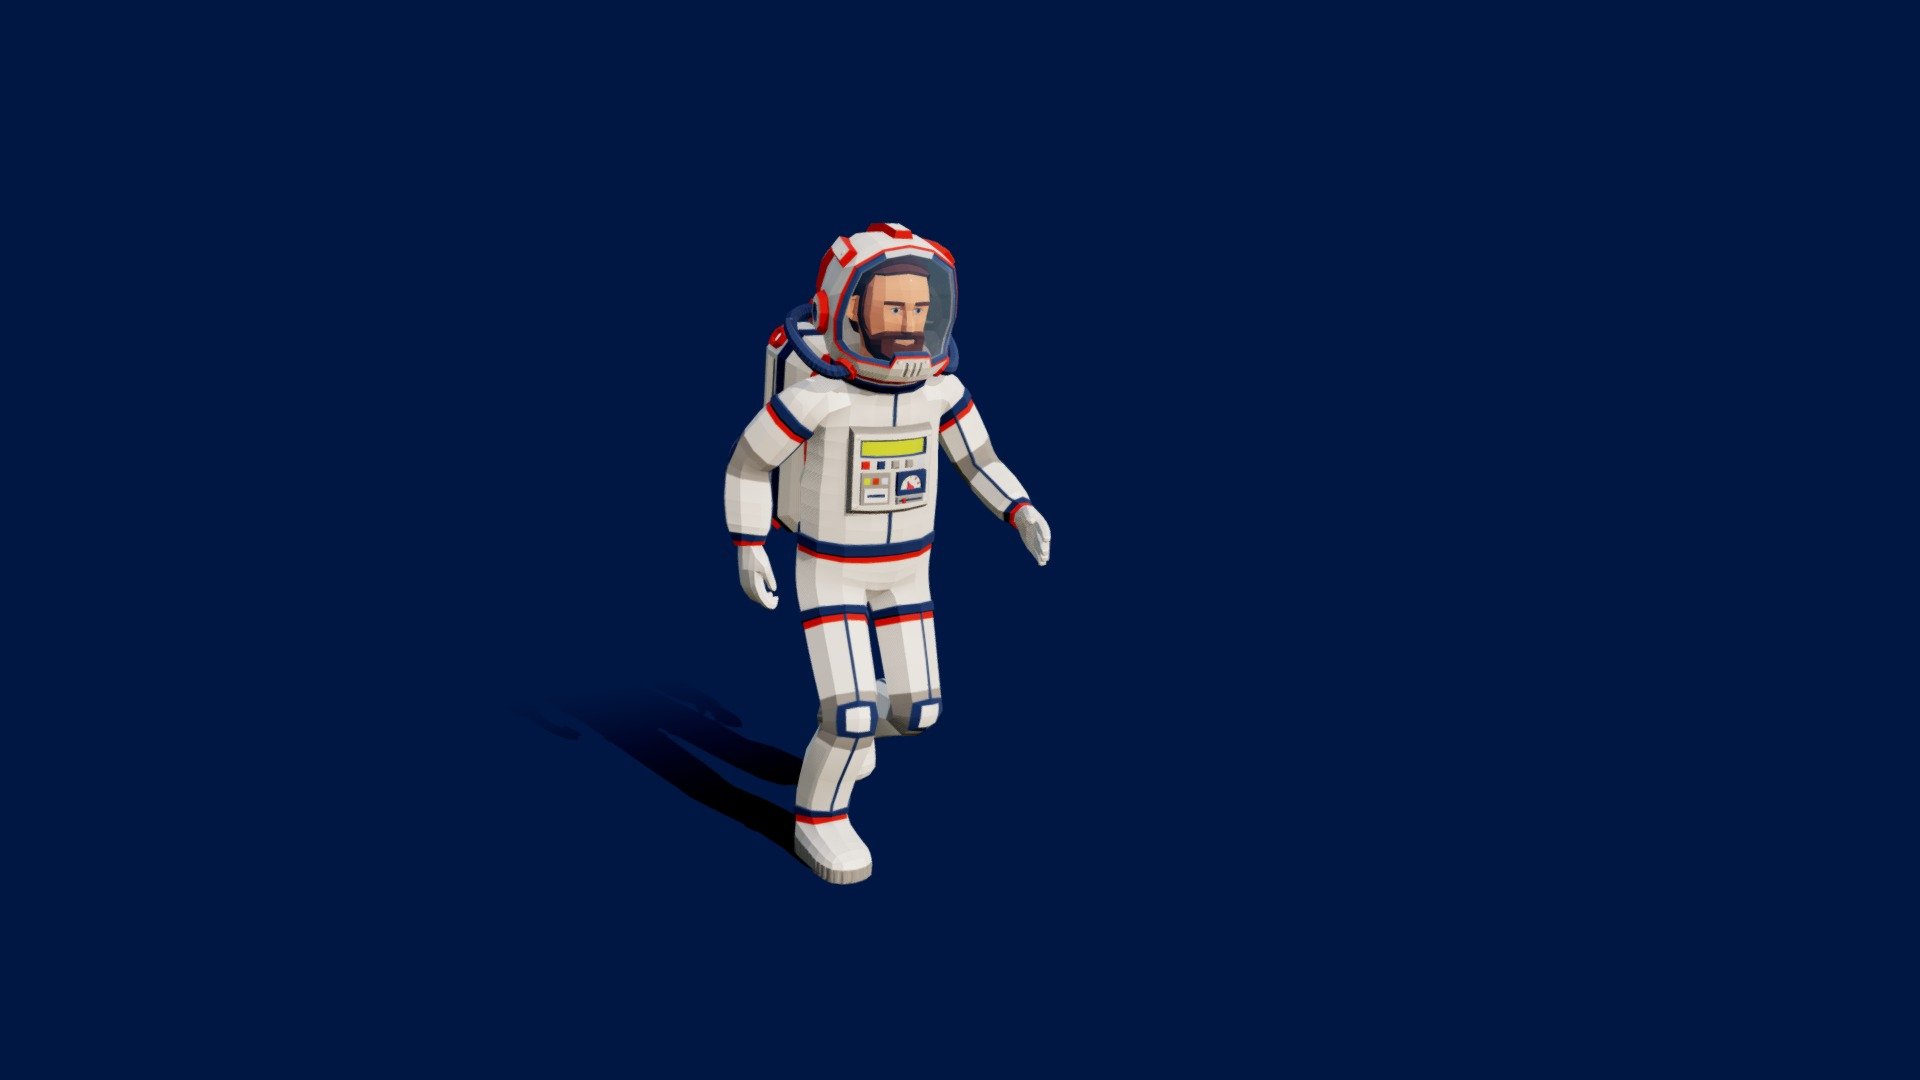 The low-poly stylized astronaut was made in Blender 3D and features a great rig with facial animation controlled by just two bones. Five animations are included as examples for this low-poly astronaut in a spacesuit, but you can easily create any other poses and animations for this character.

This astronaut in a spacesuit uses a standard set of textures including base color, normal map, roughness map, metallic map, emissive map, and transparency map. This means you can import this model into different 3D applications, such as Unity and others 3d model